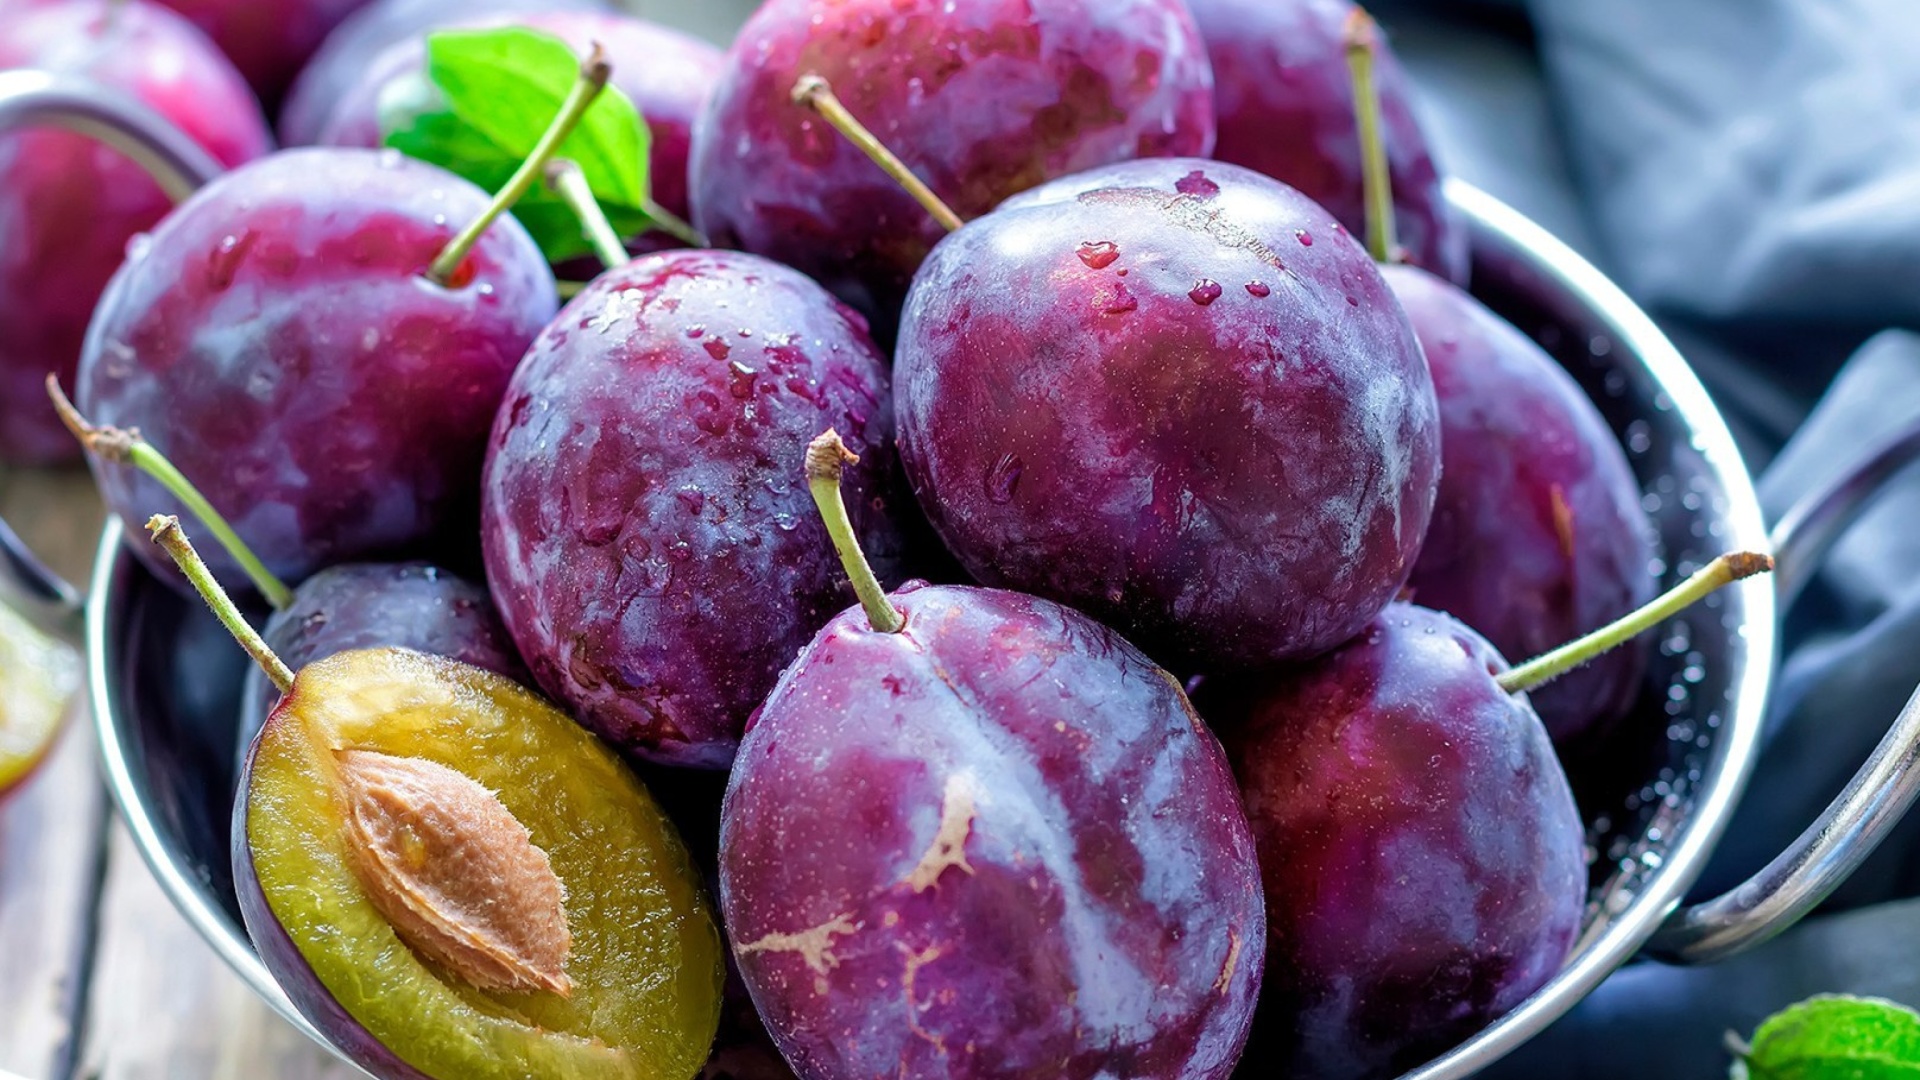 Das Plums with Vitamins Wallpaper 1920x1080